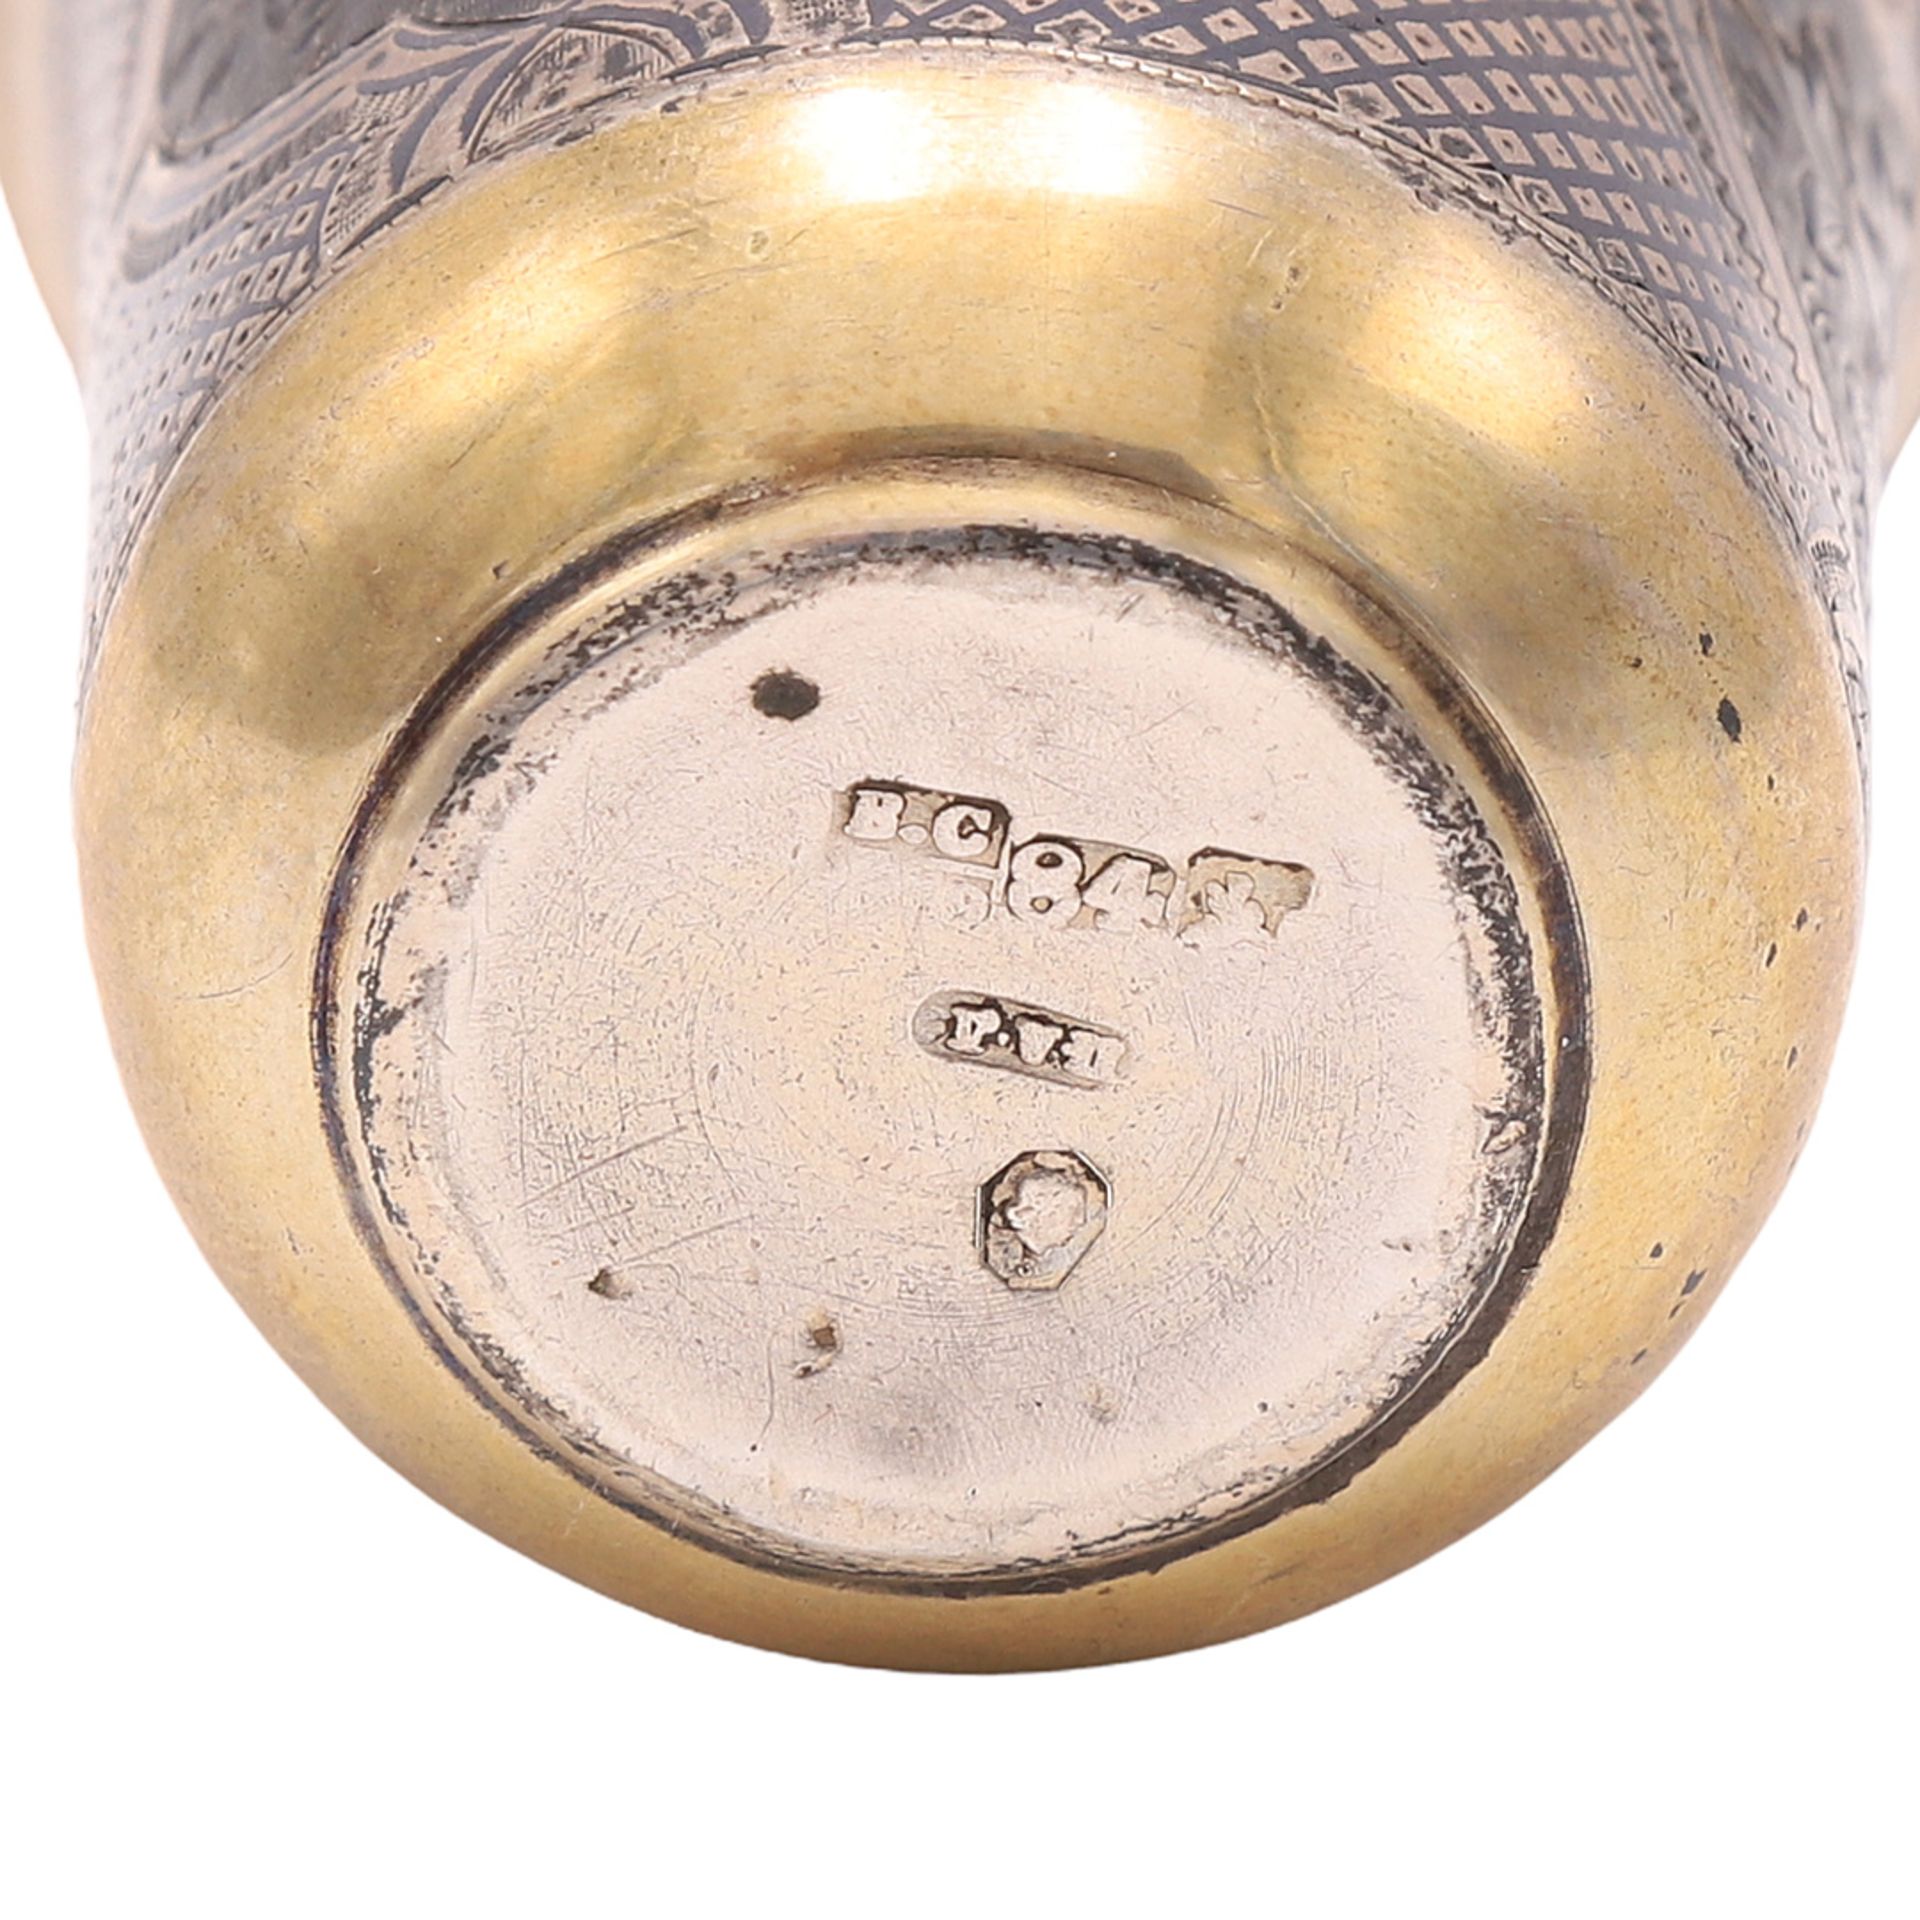 Vodka cup, Russia, 19th century - Image 2 of 2